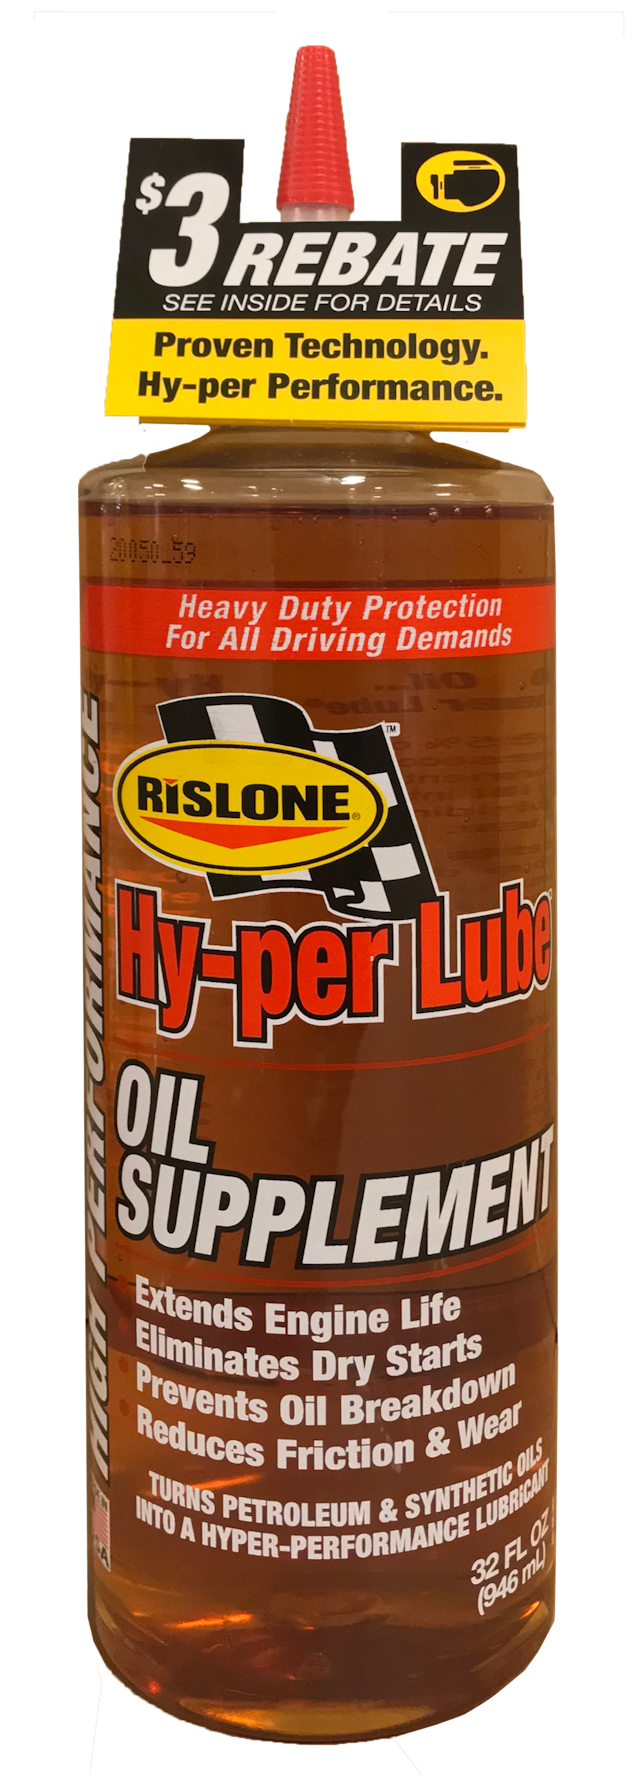 rislone-hy-per-lube-oil-supplement-gets-a-new-look-vehicle-service-pros